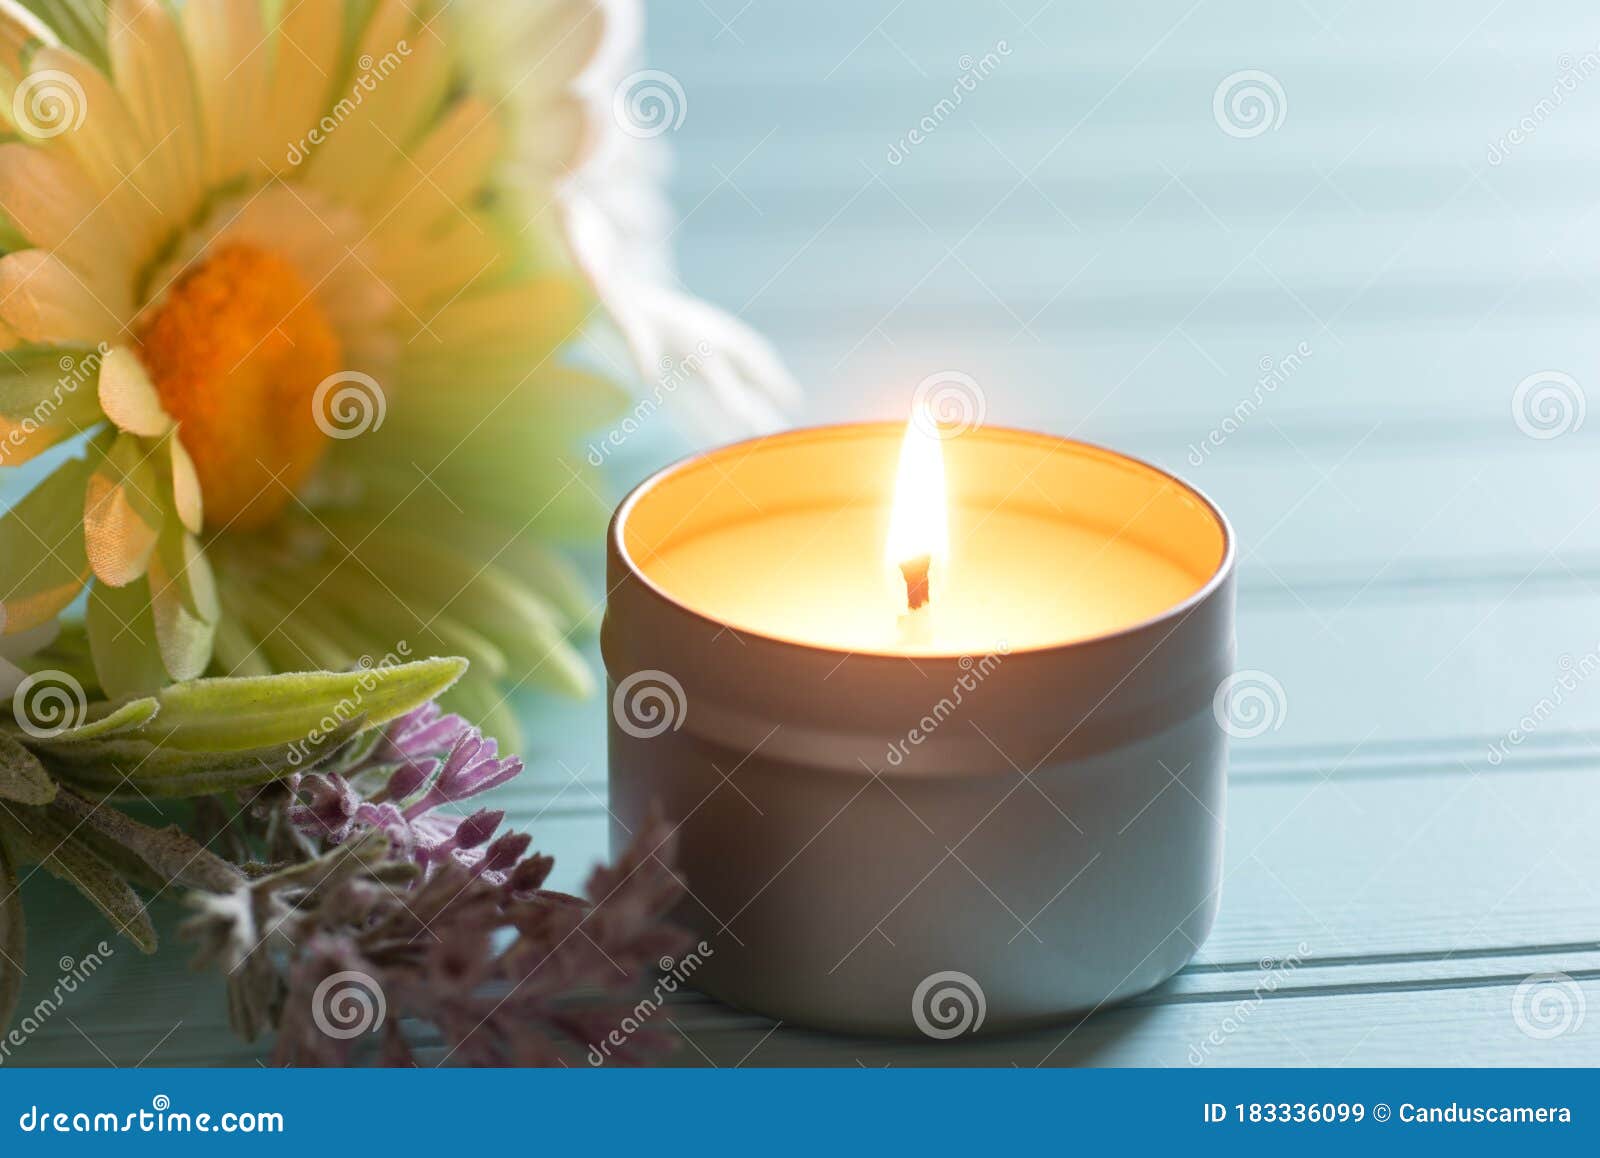 lighted and scented votive candle in a tin holder with flowers on the side, all on teal boards table background with window light